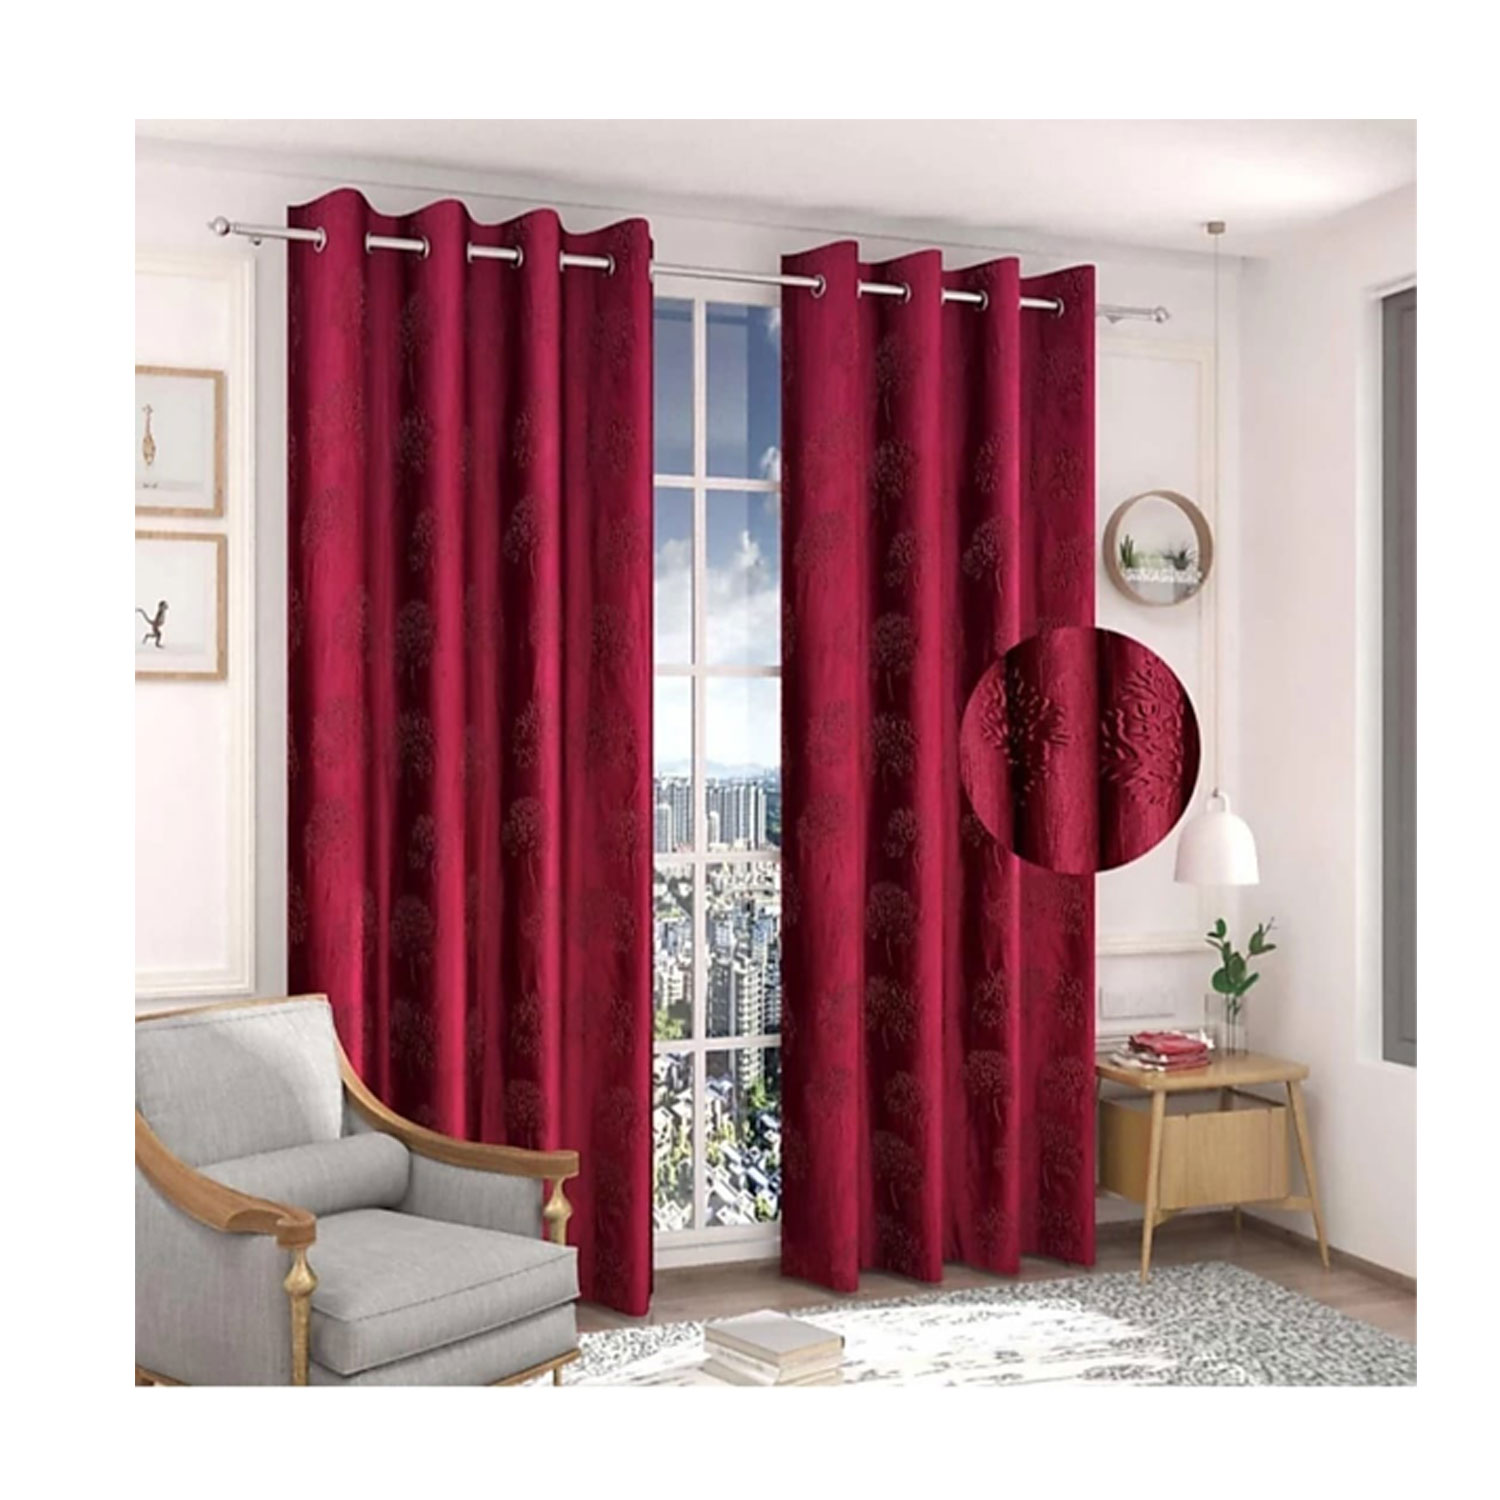 WI INDIA INTERNATIONAL LATEST EMBOSS BULLET CURTAINS SET OF 2